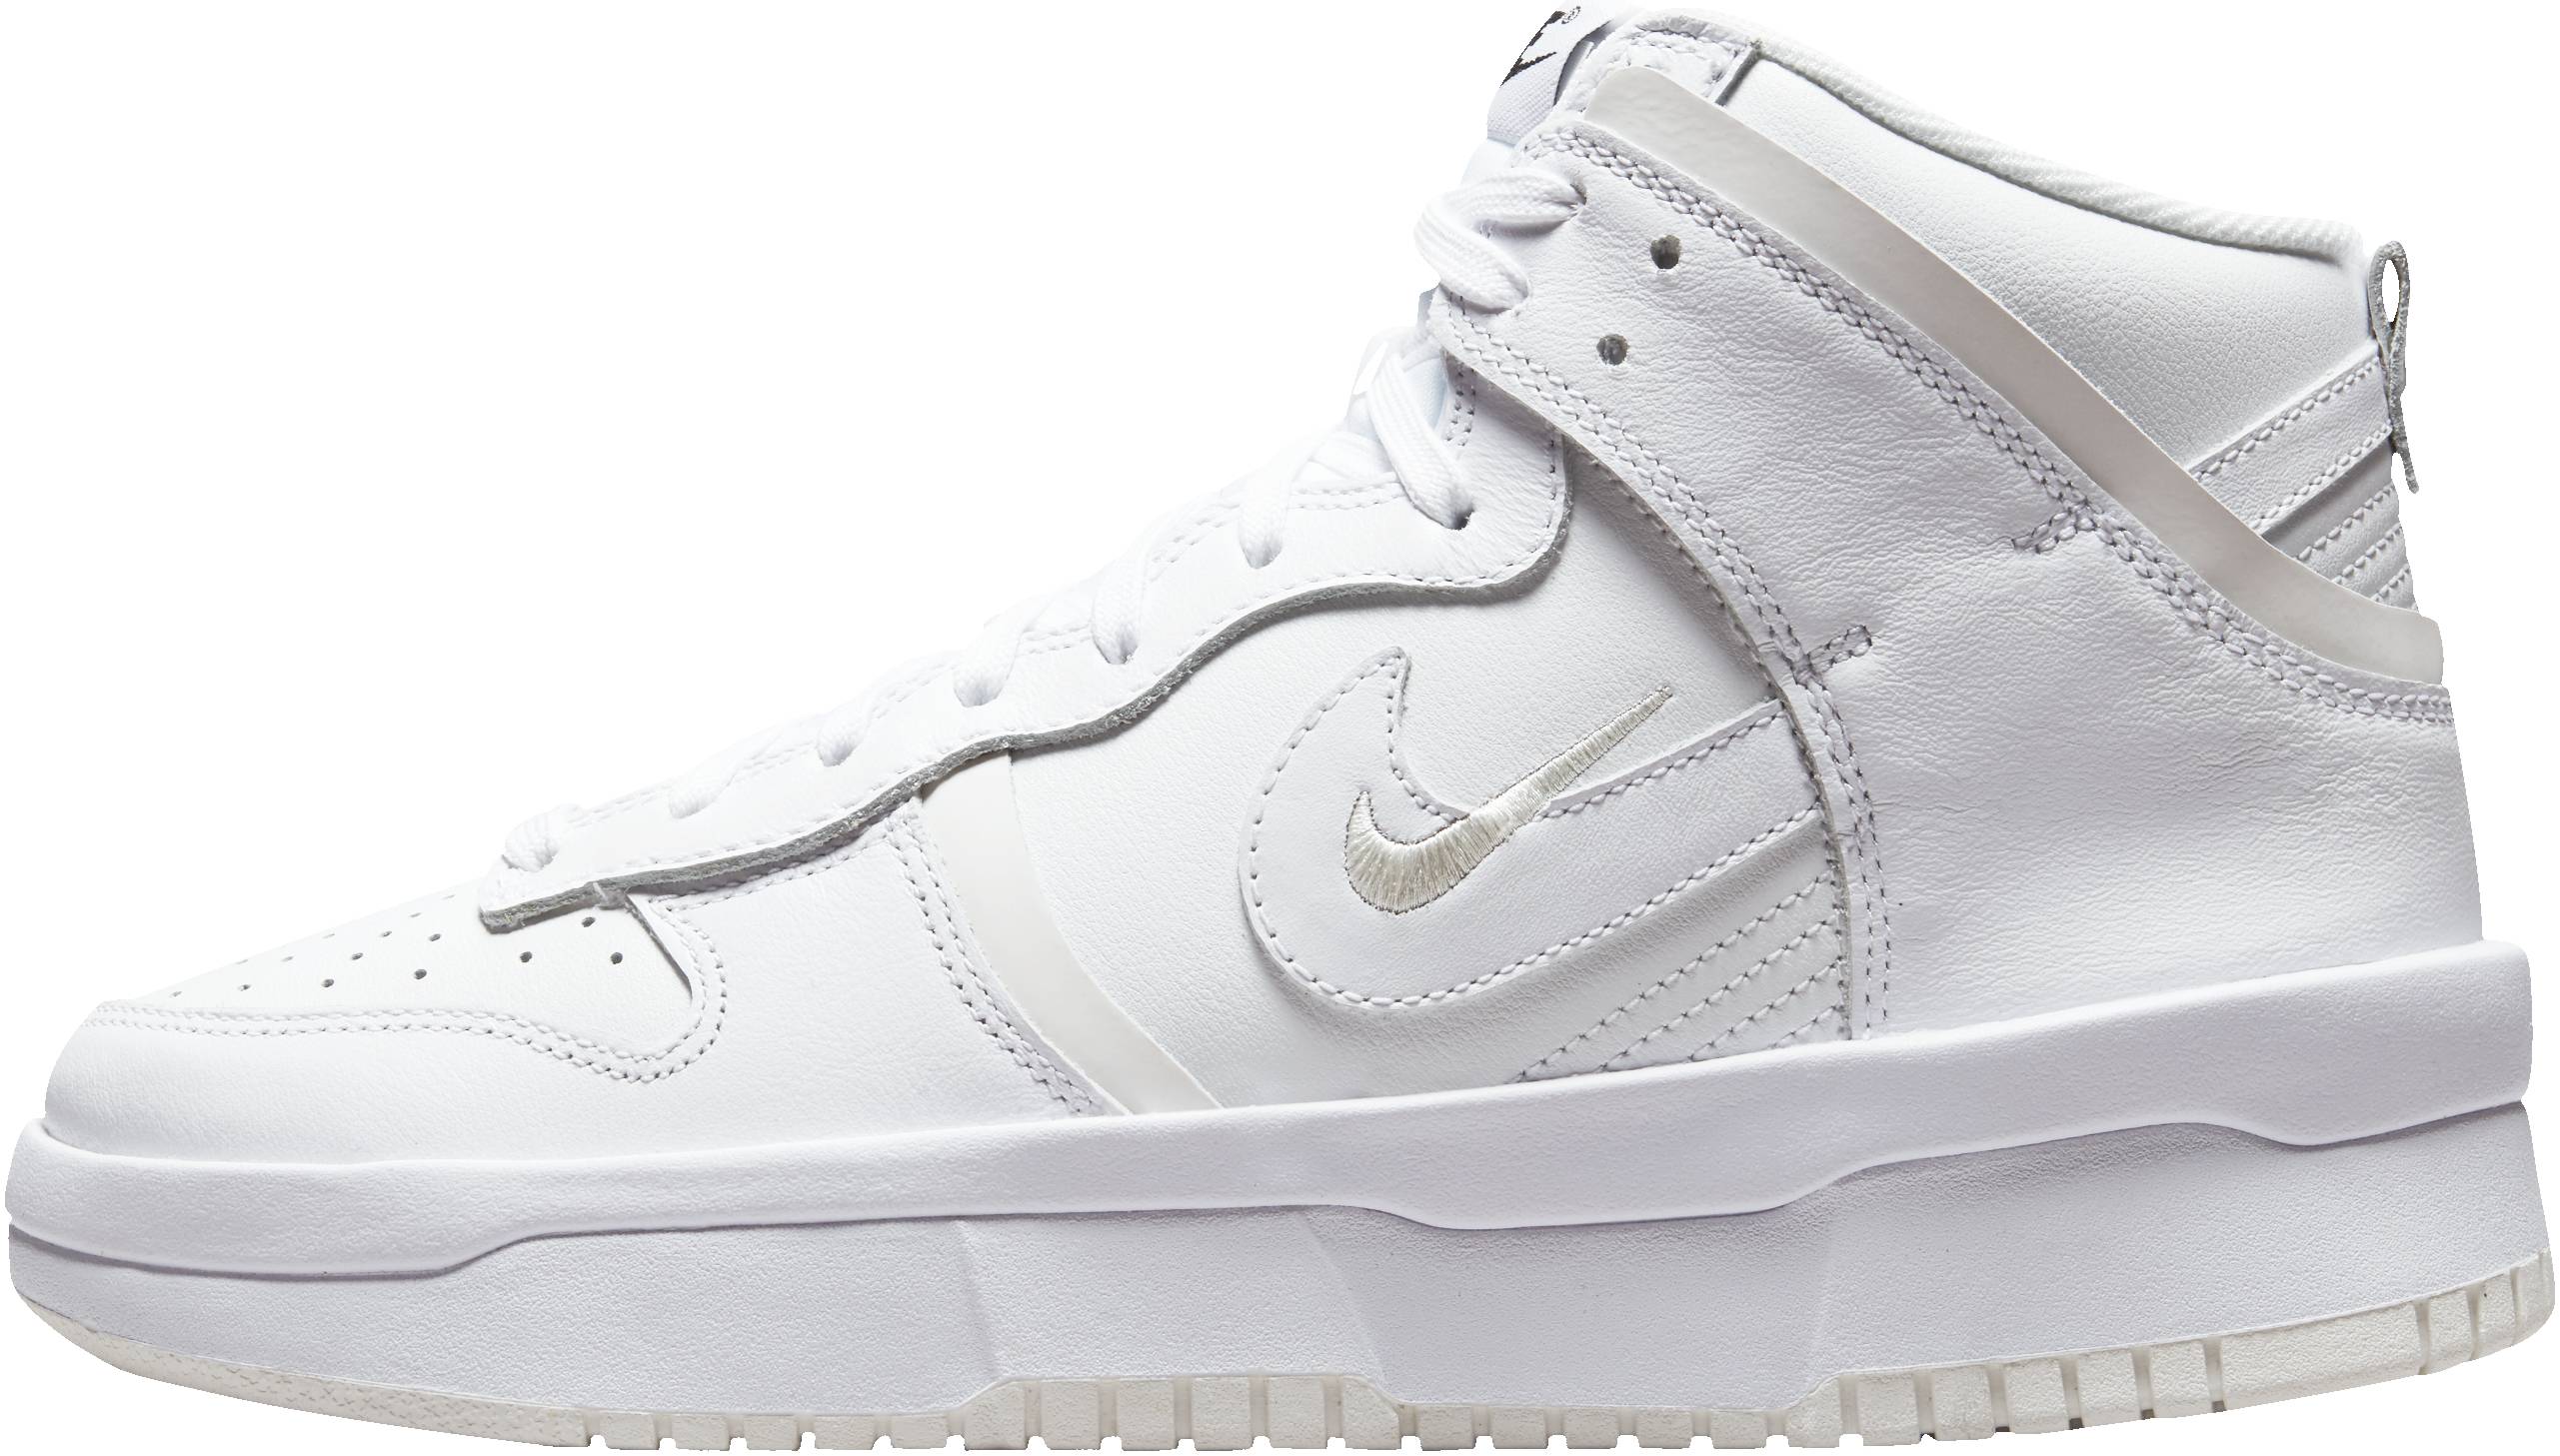 The best selling Nike Air Force 1s at StockX right now - Sneakerjagers